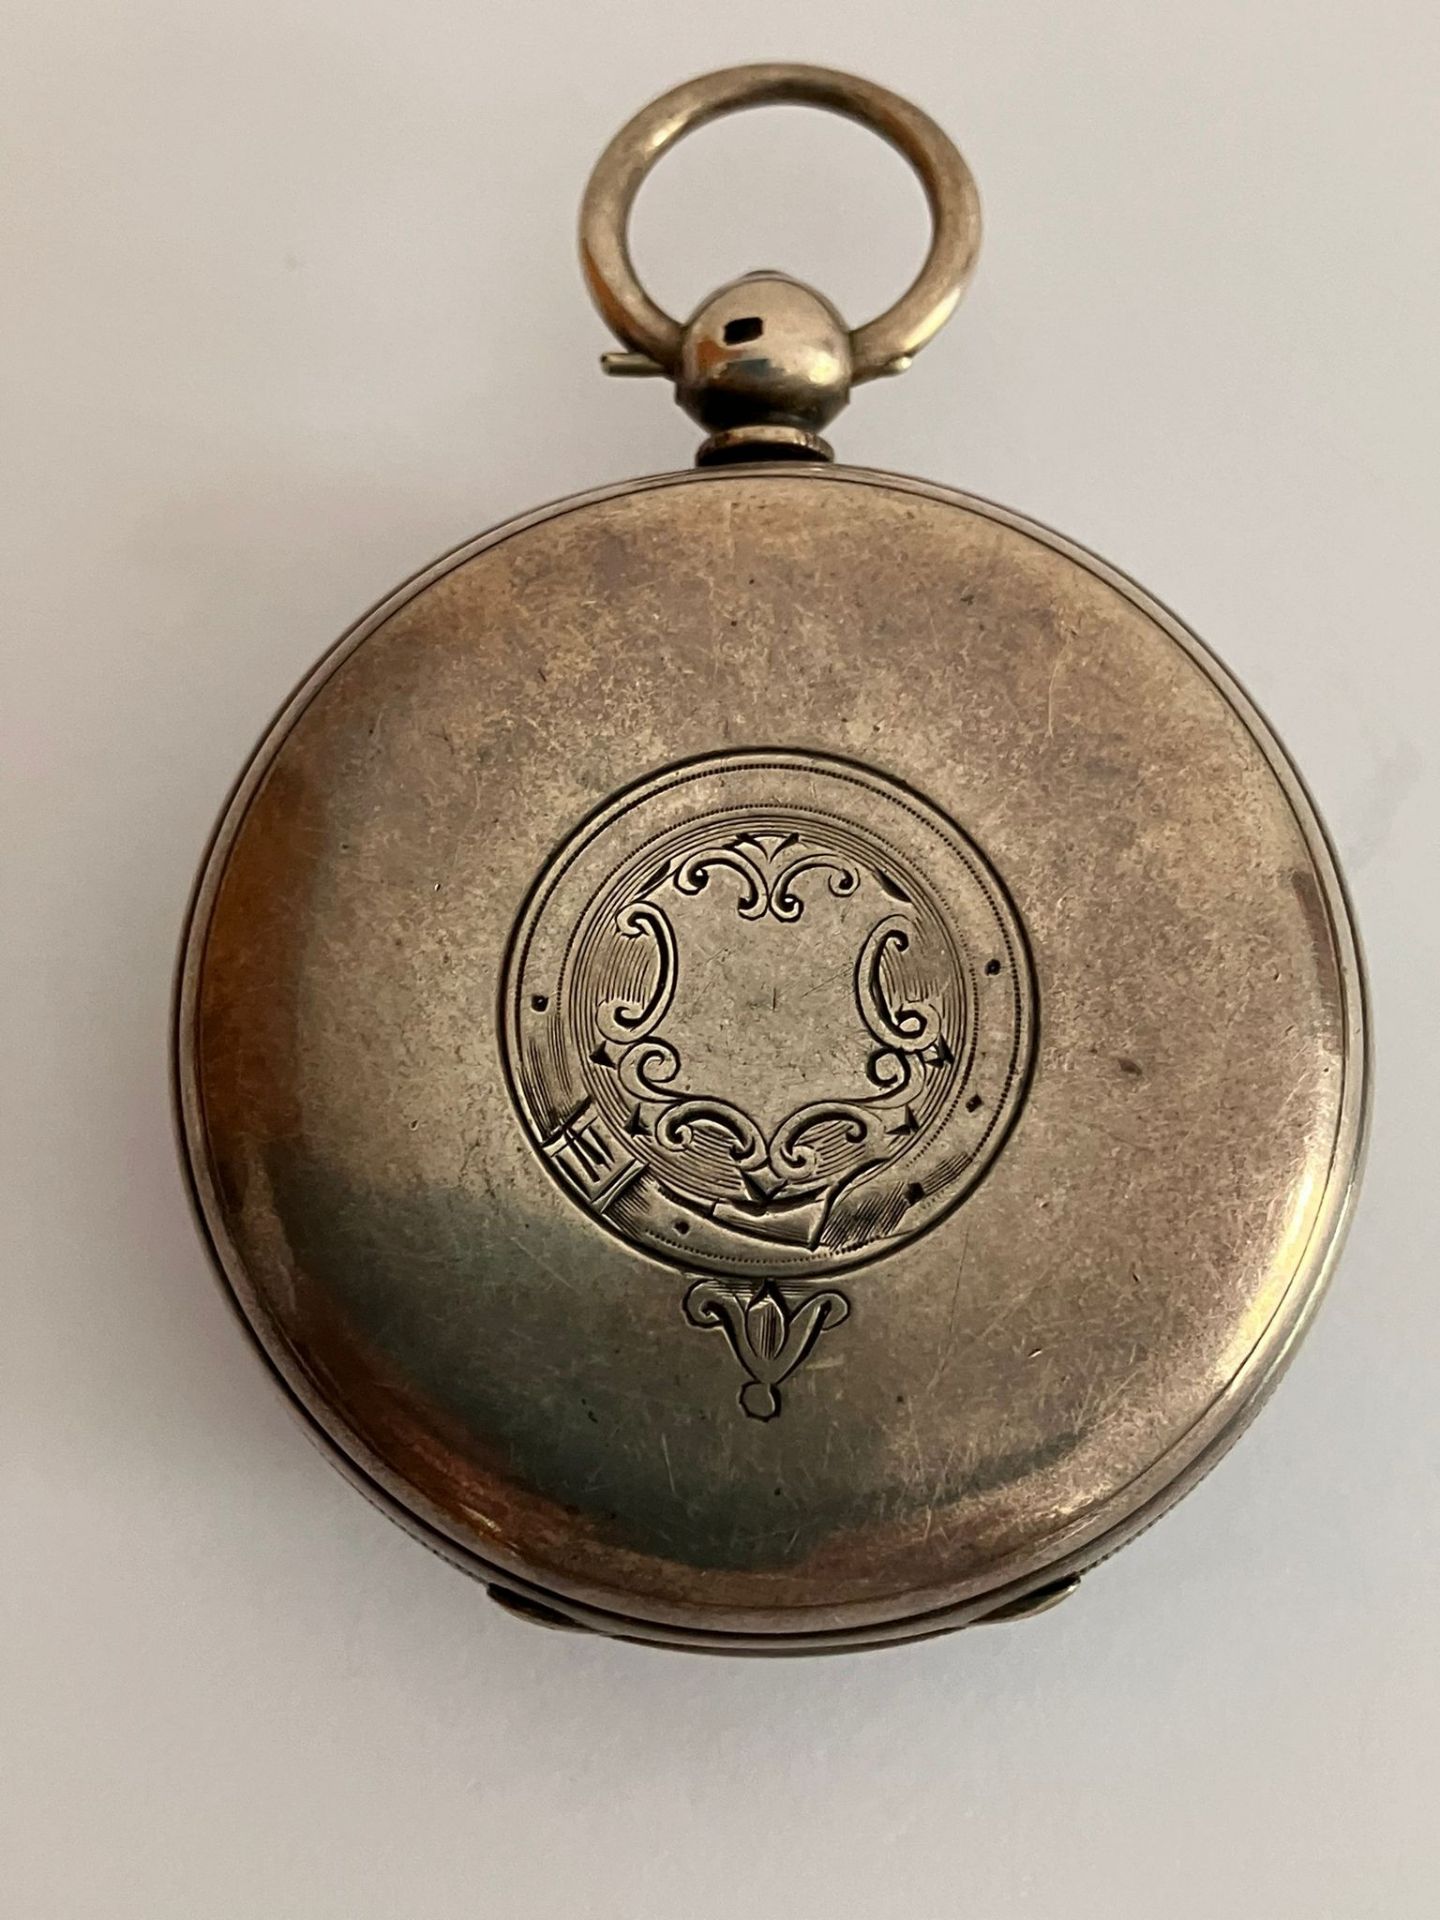 Antique SILVER POCKET WATCH with Silver Case hallmarked Robert John Pike, London 1873. Watch - Image 2 of 10